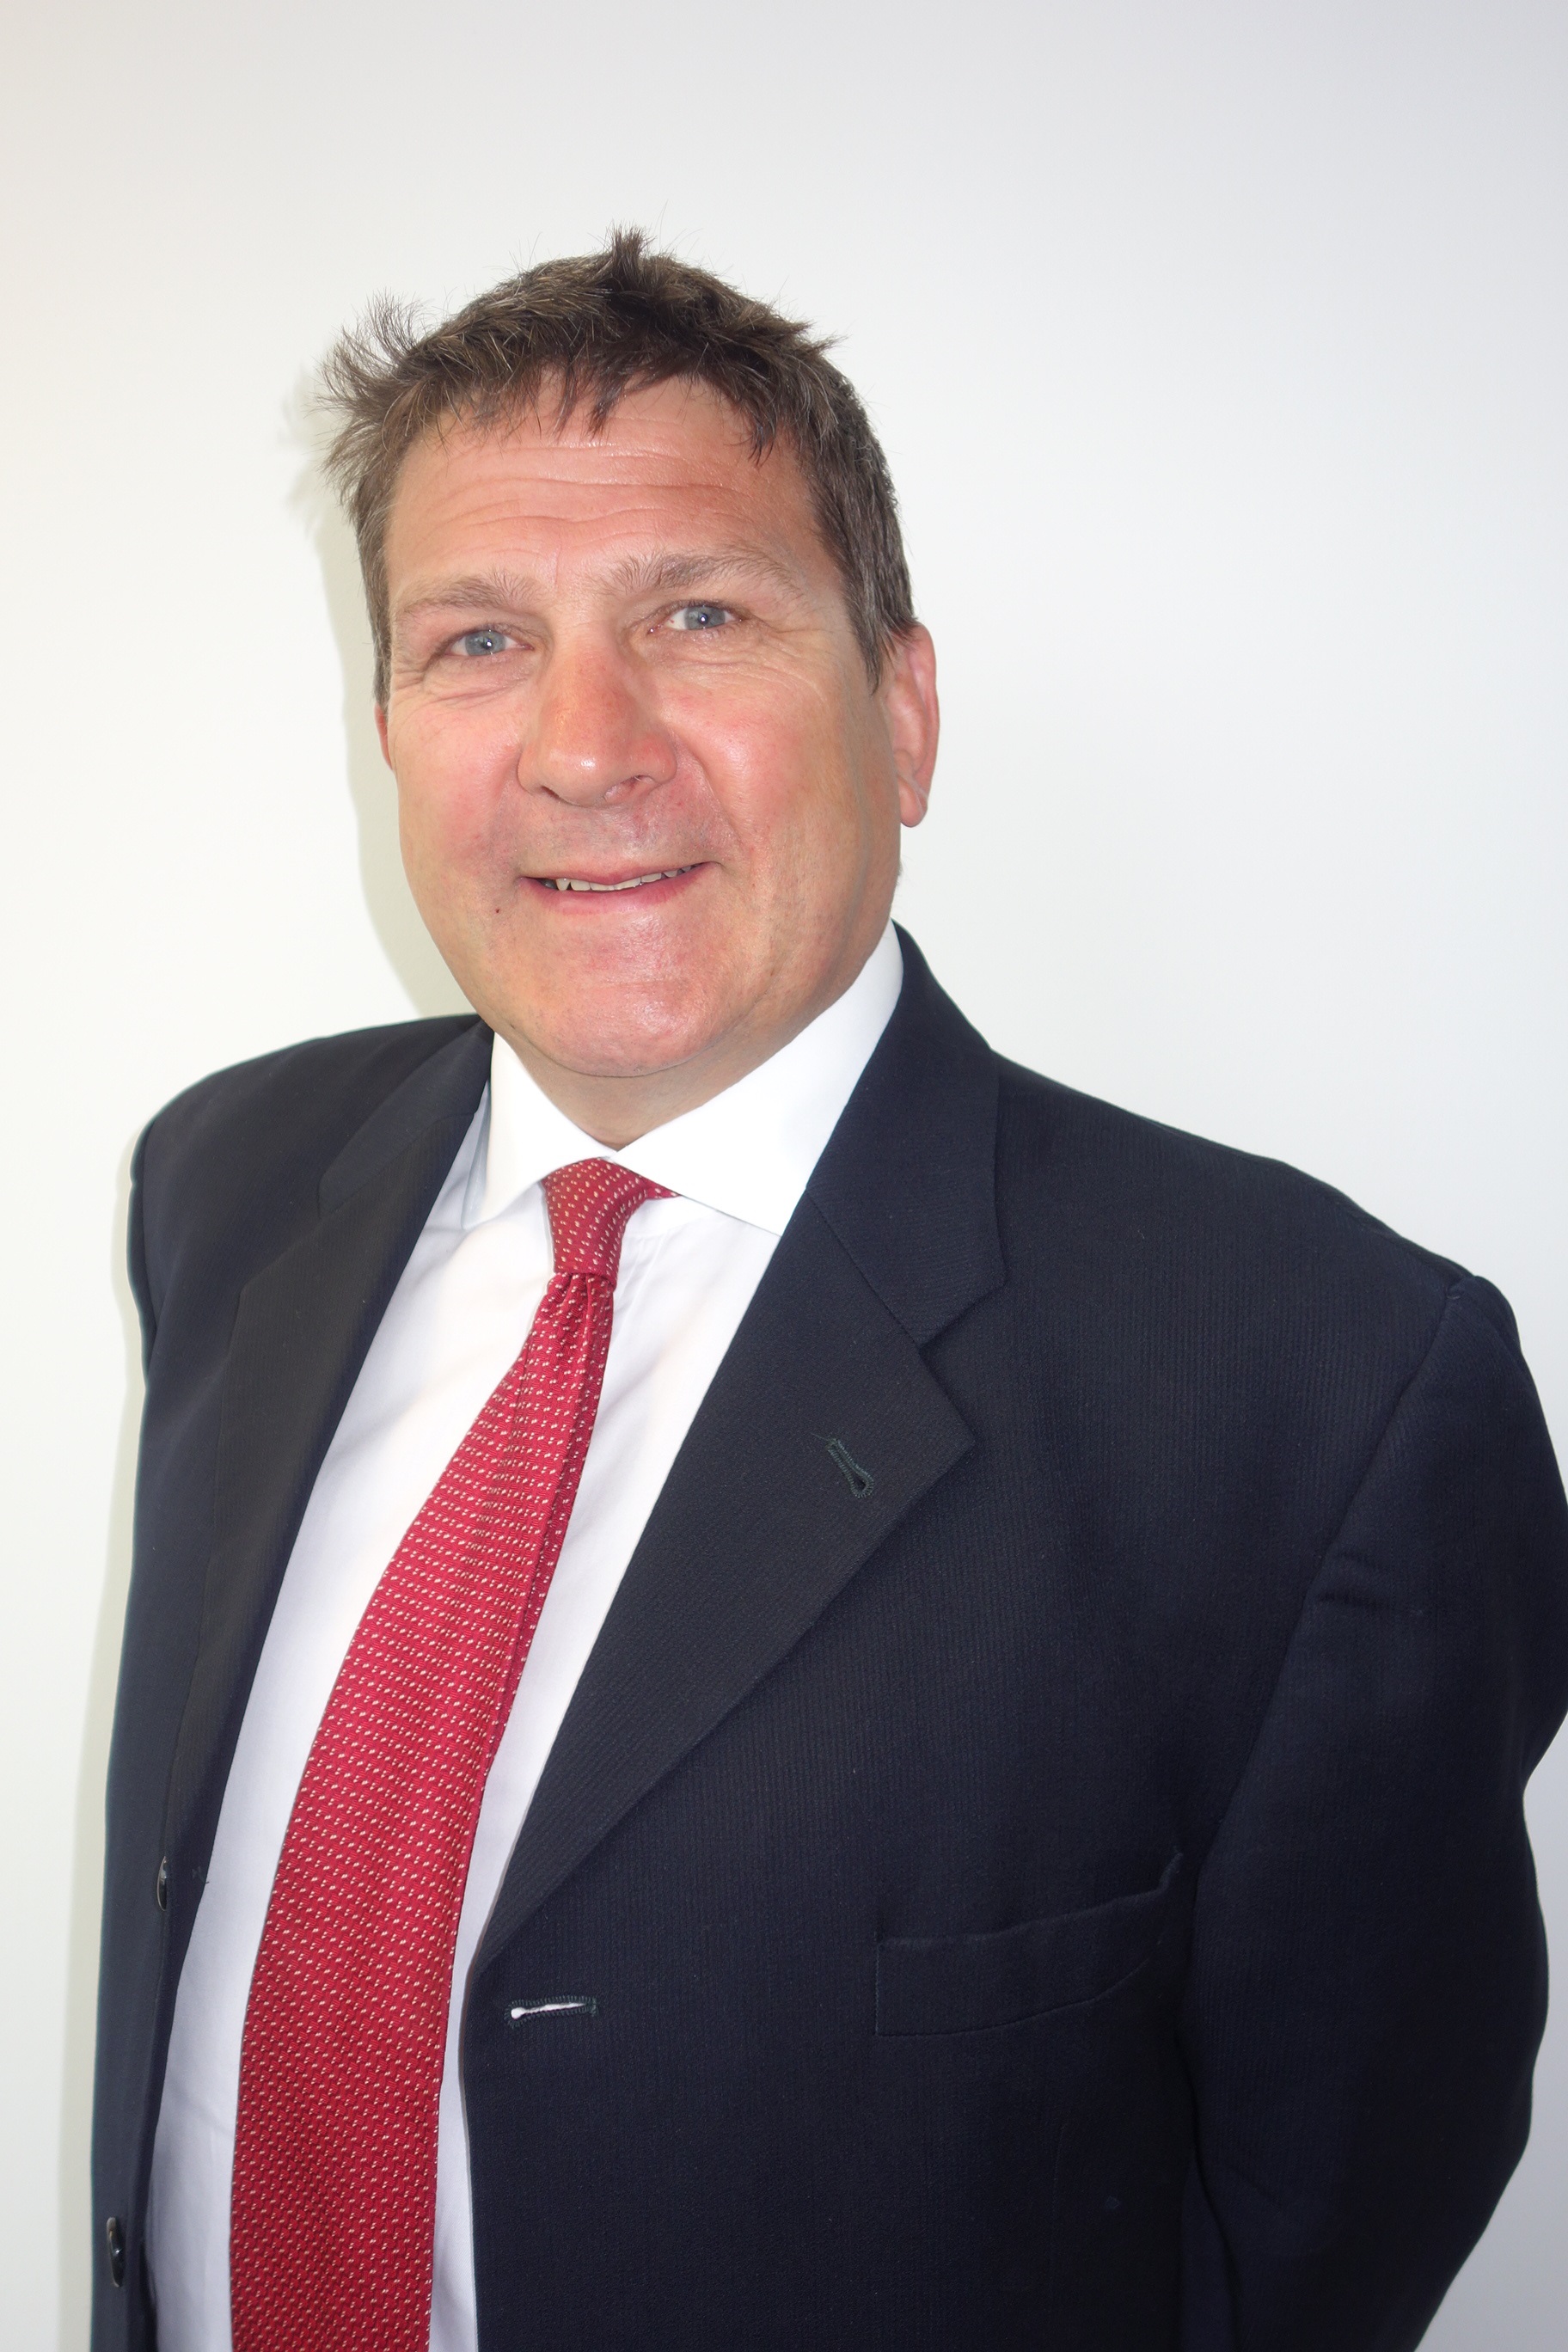 Land Agent Tim gets grounded in new role